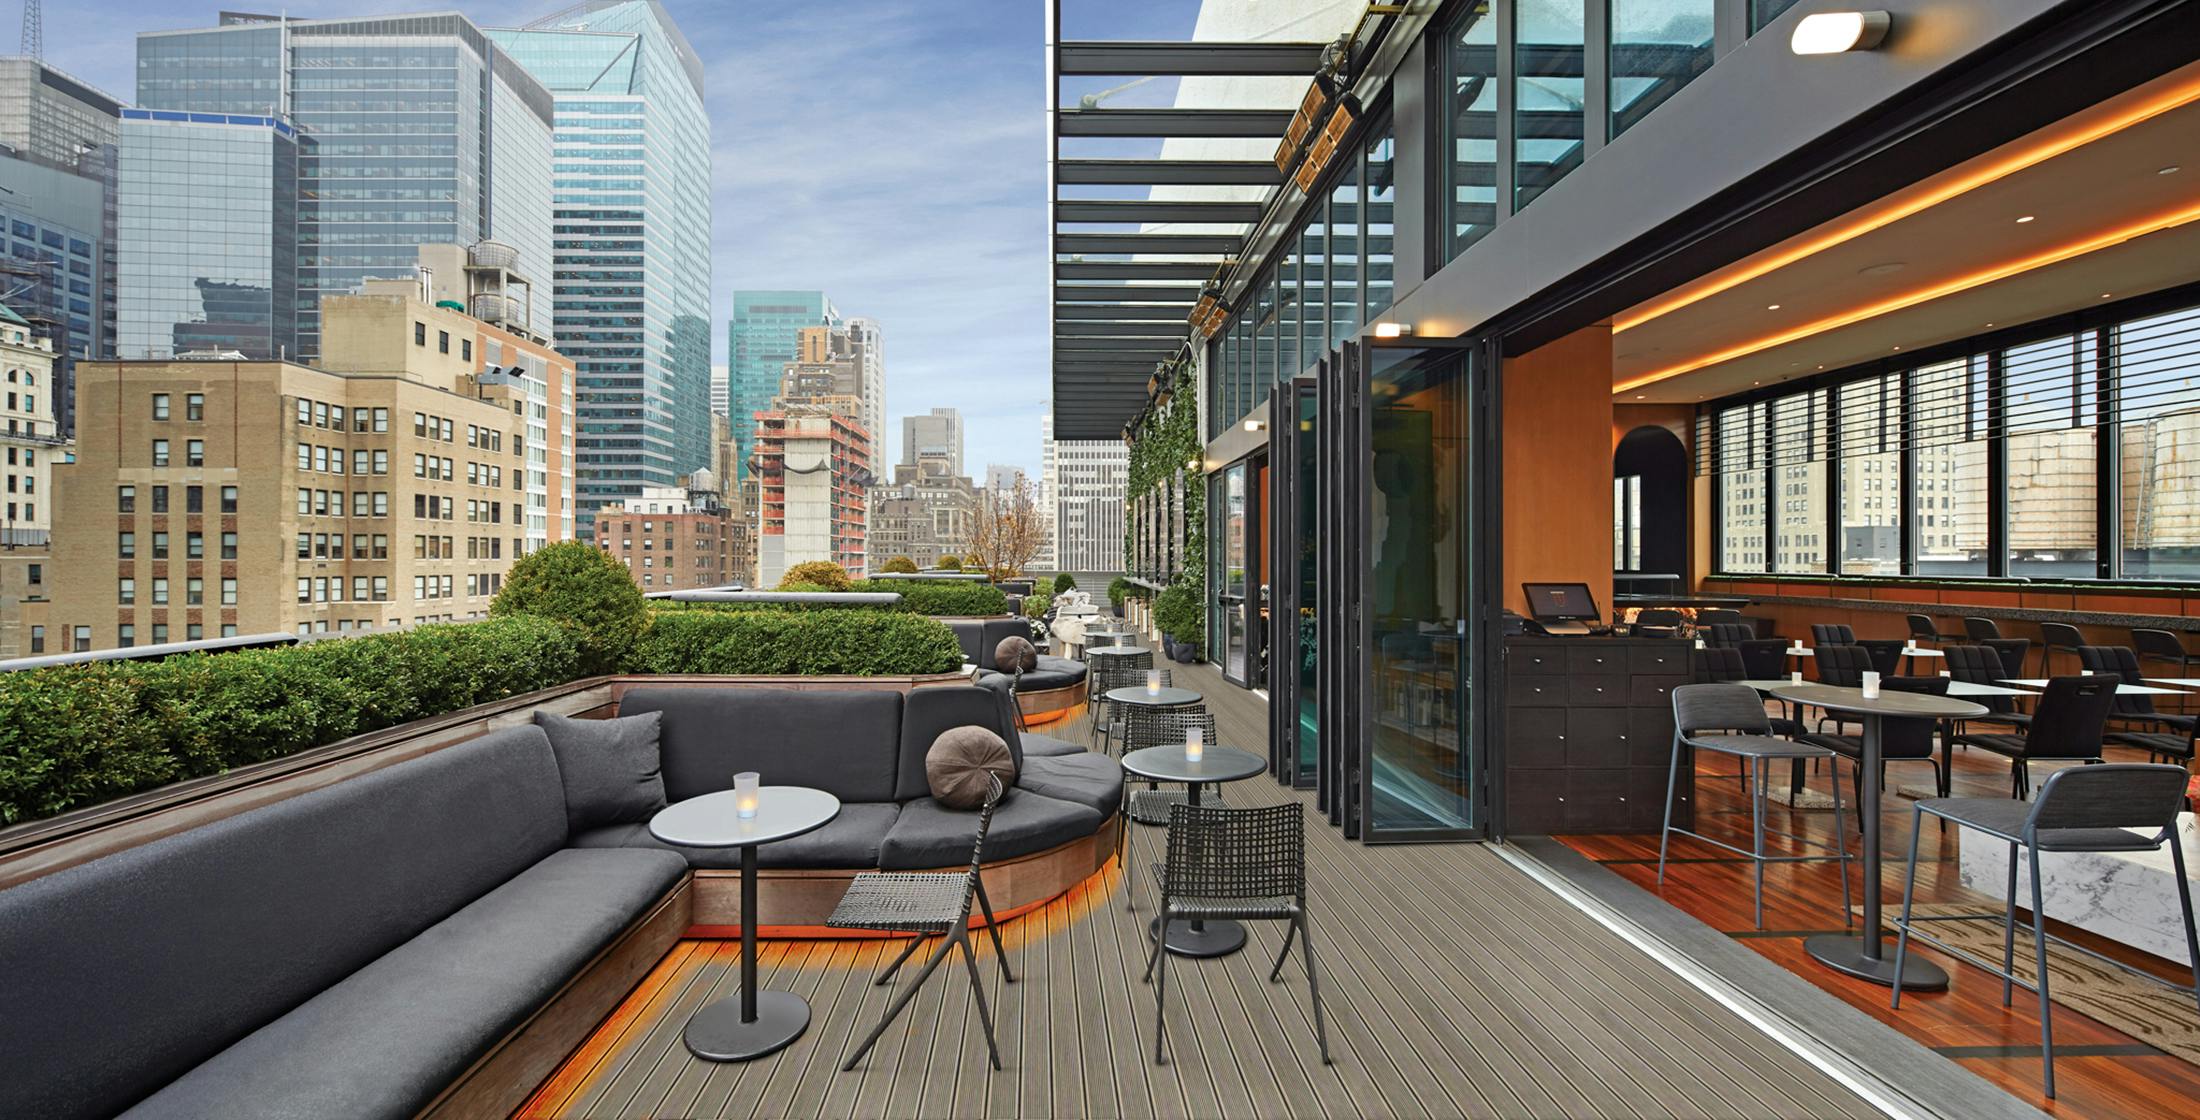 New York City rooftop design with NanaWall systems